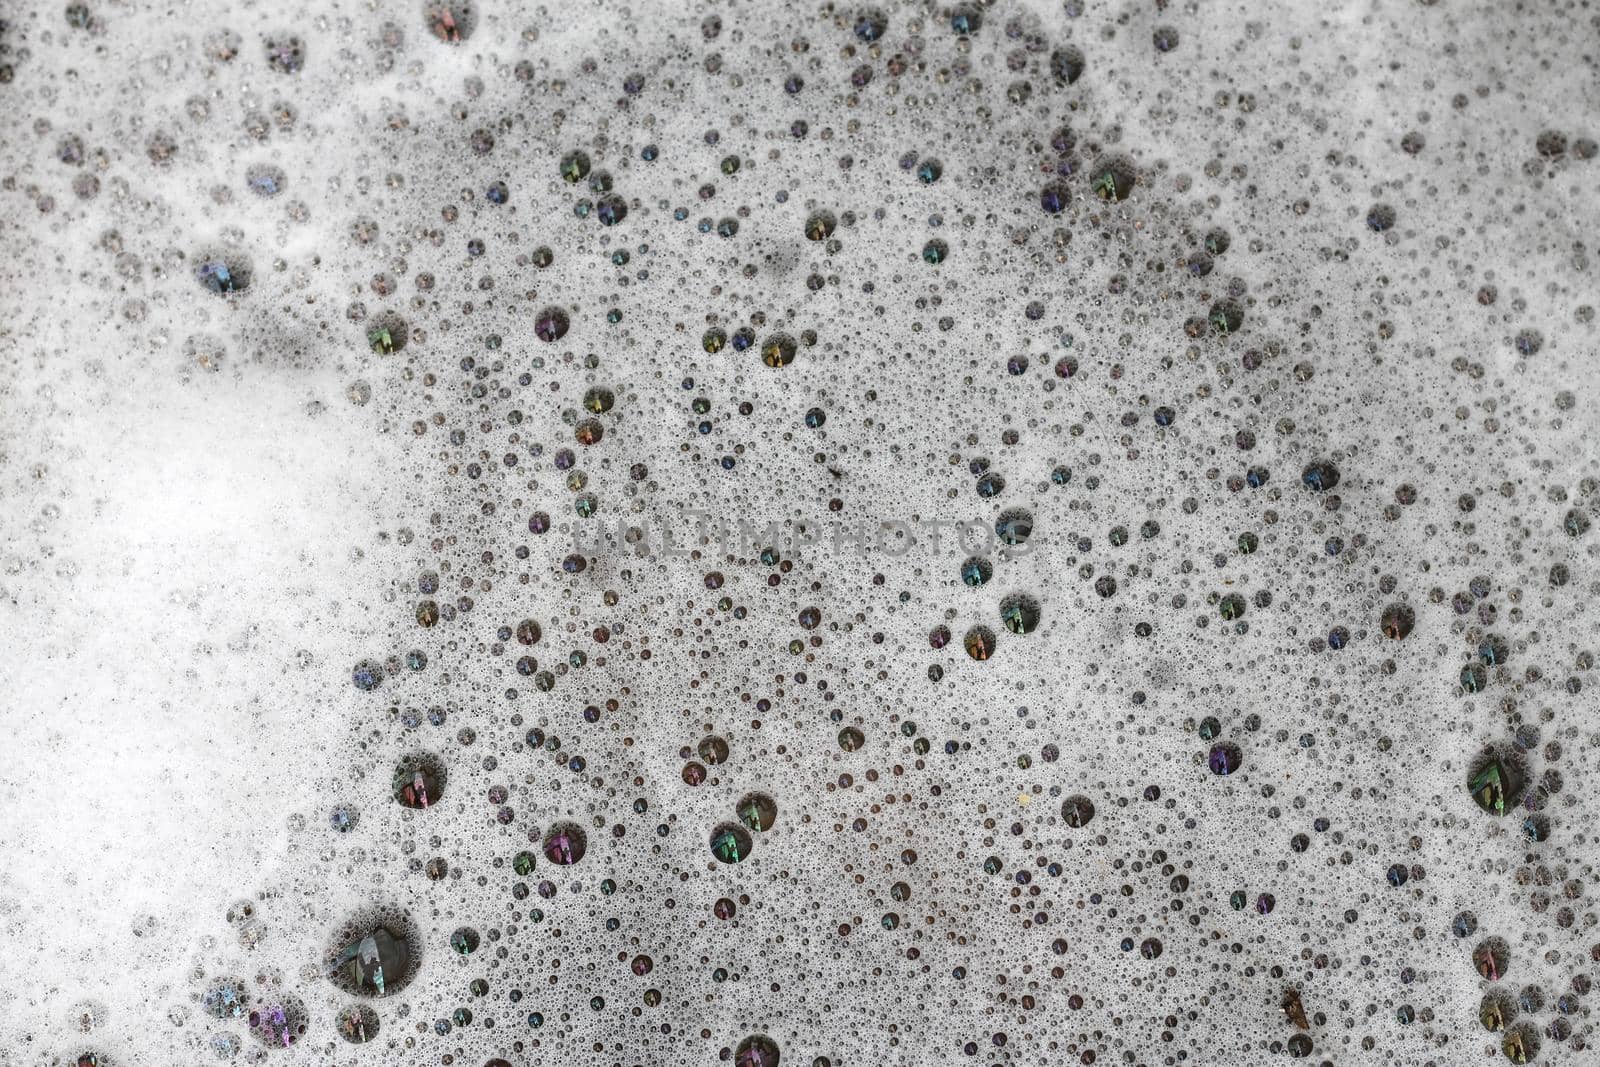 Detergent bubbles float in the waste water. by pichai25